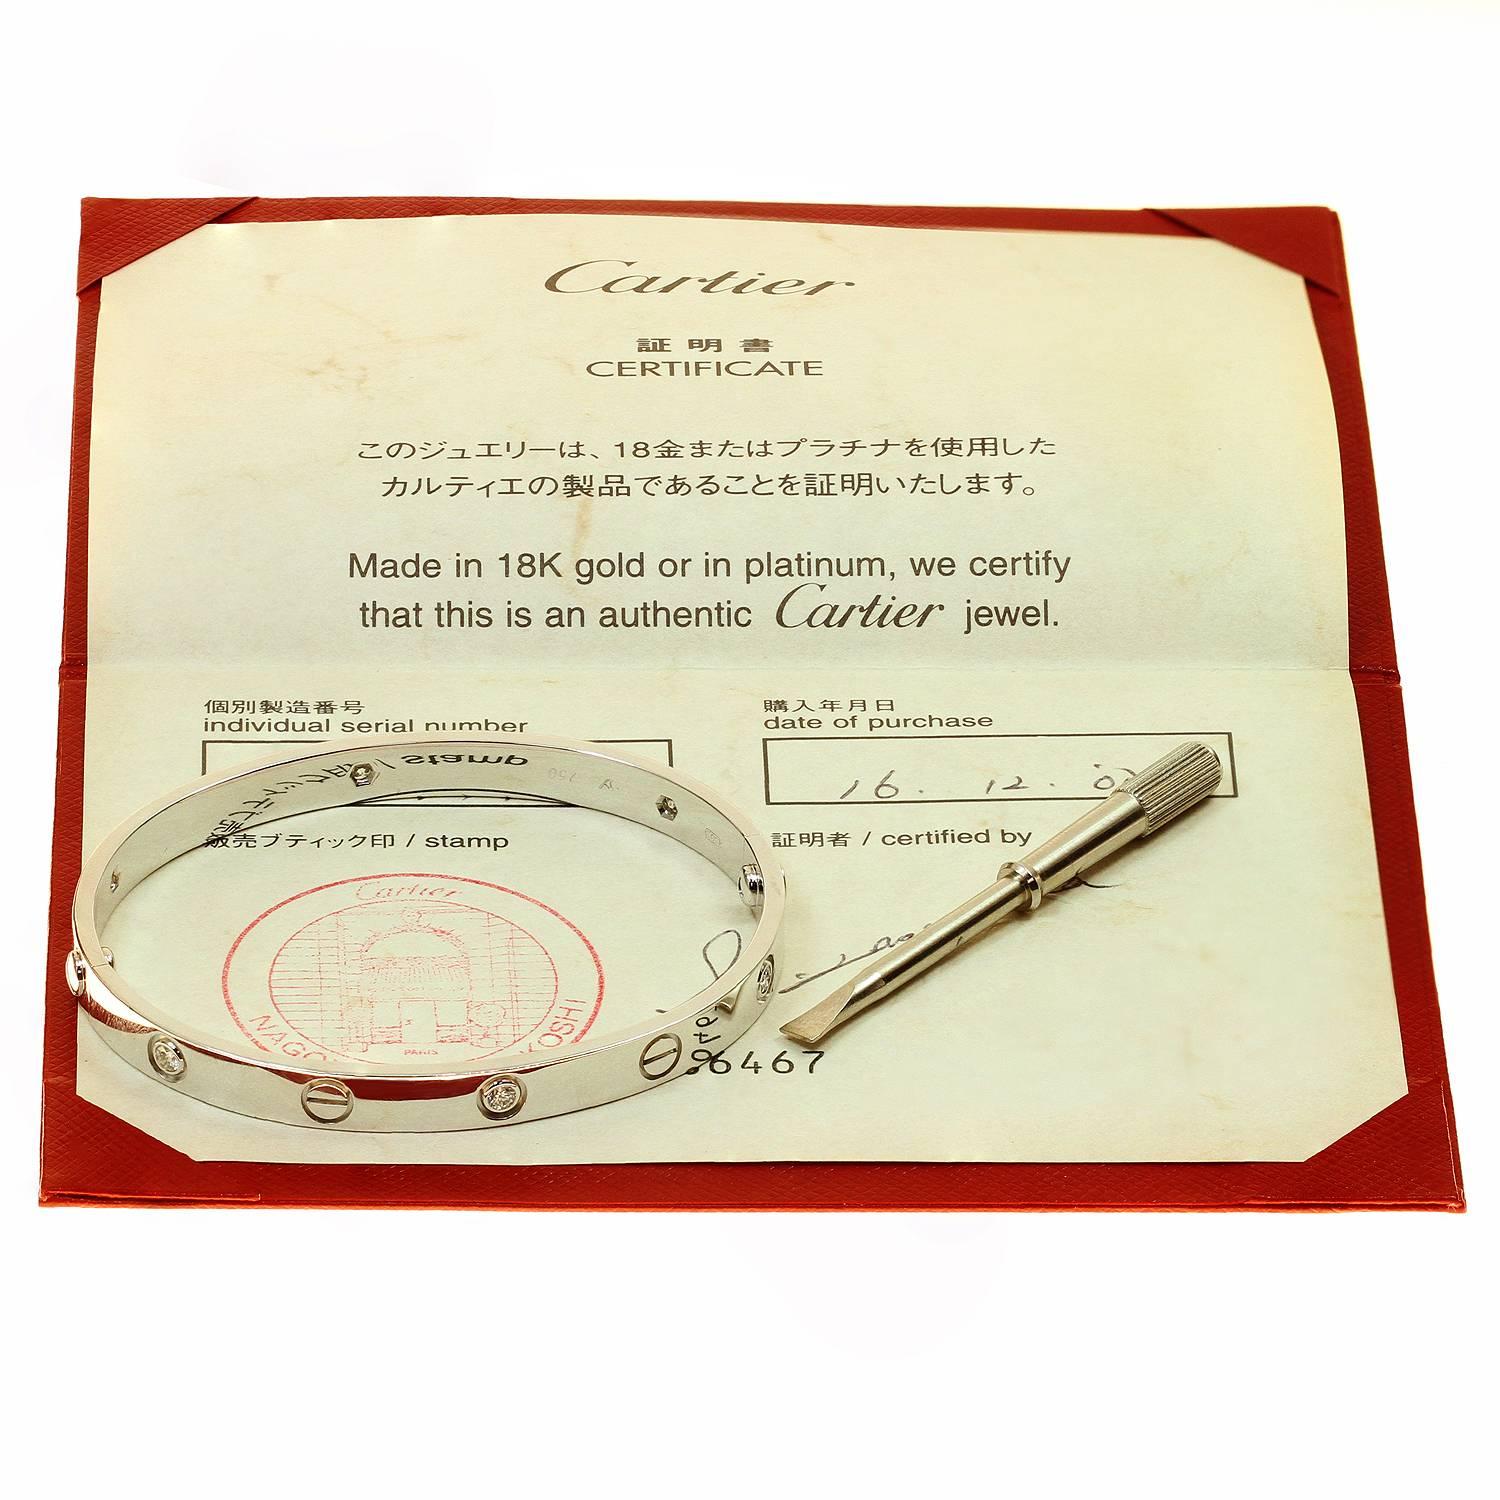 This iconic and timeless bracelet from Cartier's Love collection is finely crafted in 18k white gold and set with 6 brilliant-cut round diamonds. This bangle is a size 18. Completed with the original Cartier screwdriver, box, papers. Made in France